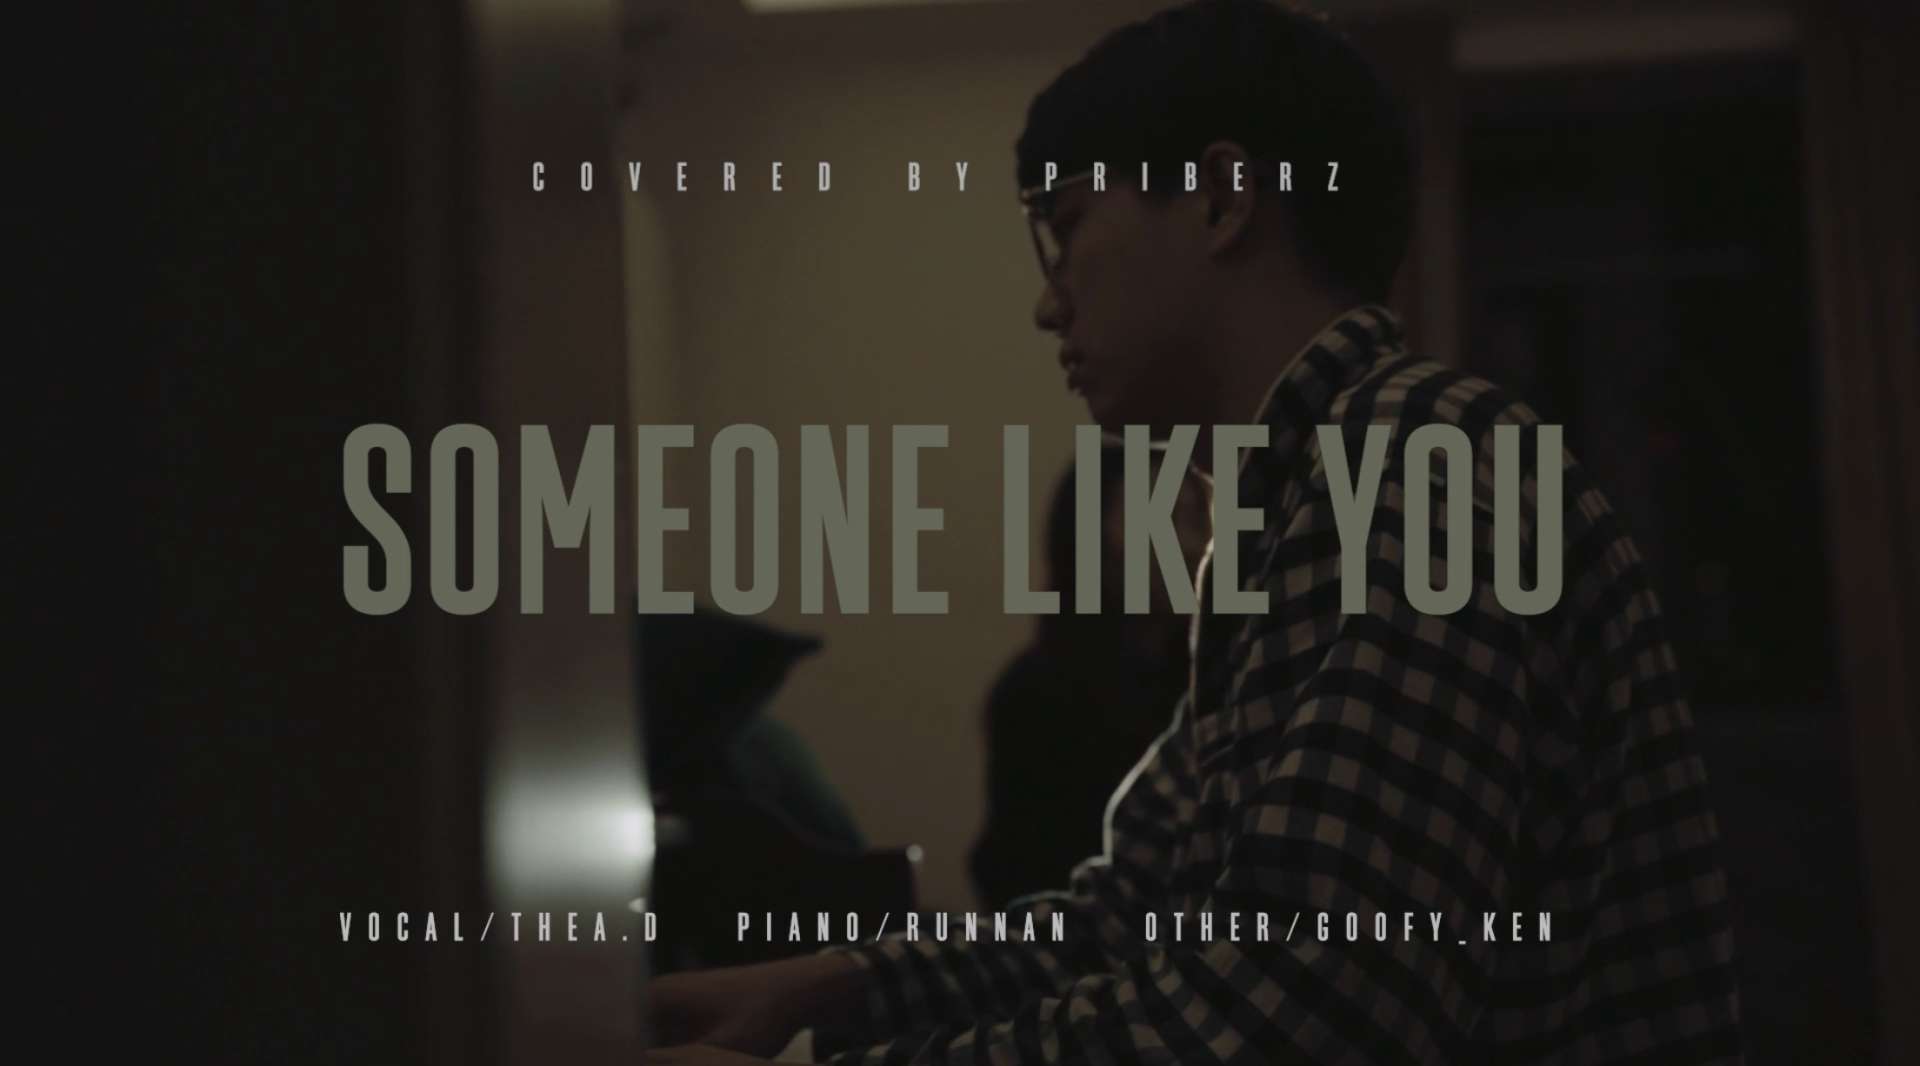 Some One Like You - Covered by Priberz